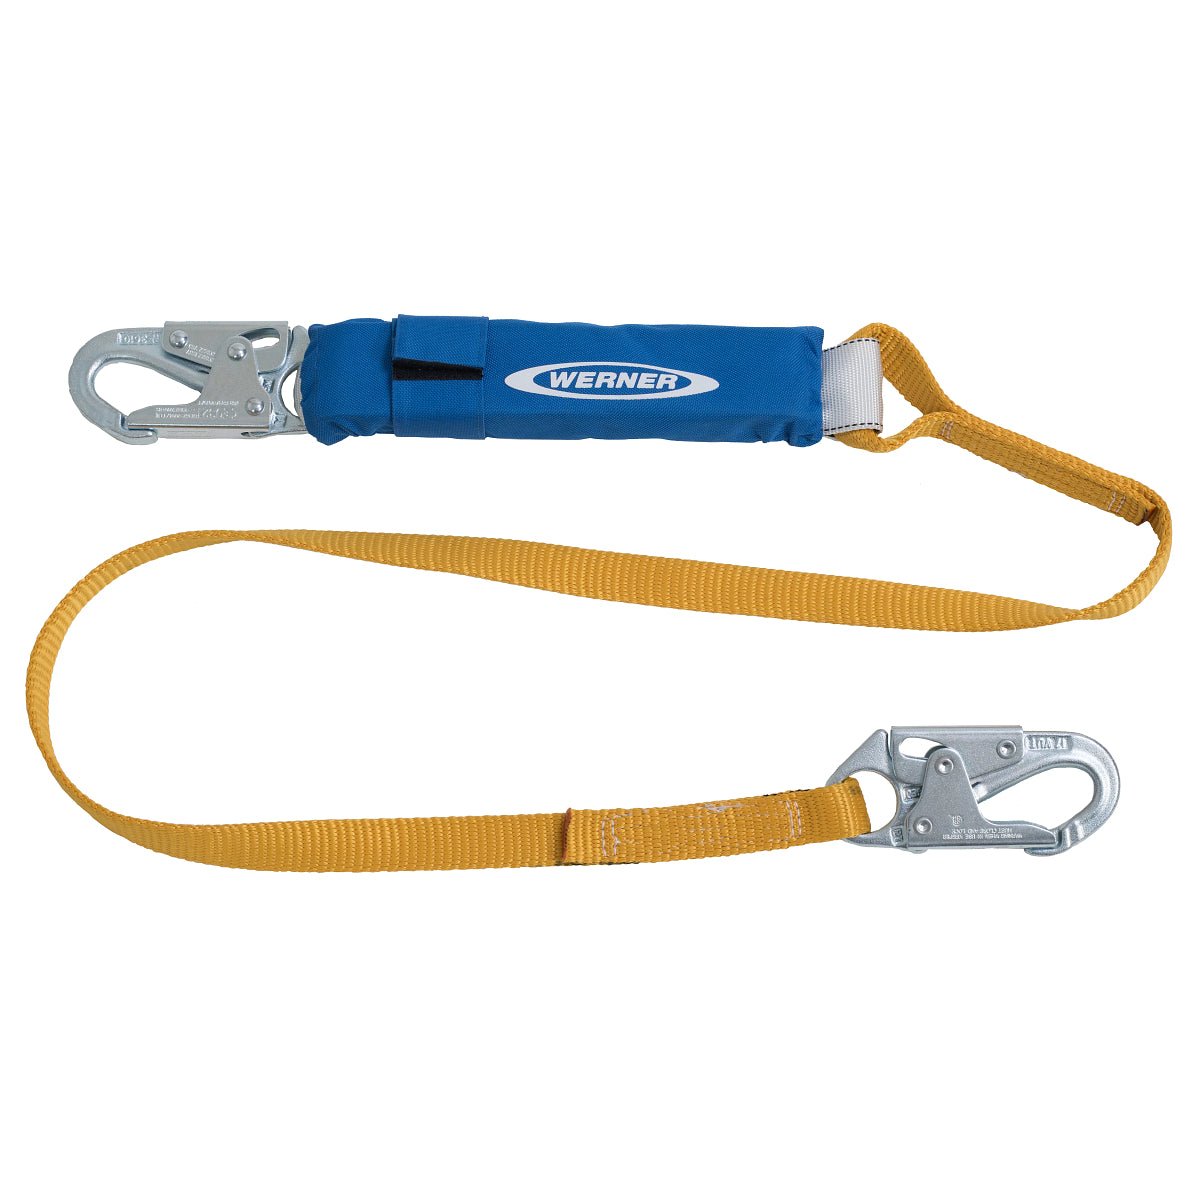 C311100 6FT Decoil Lanyard (DCELL Shock Pack, 1IN Web, Snap Hook) - Pack of 2 - Werner